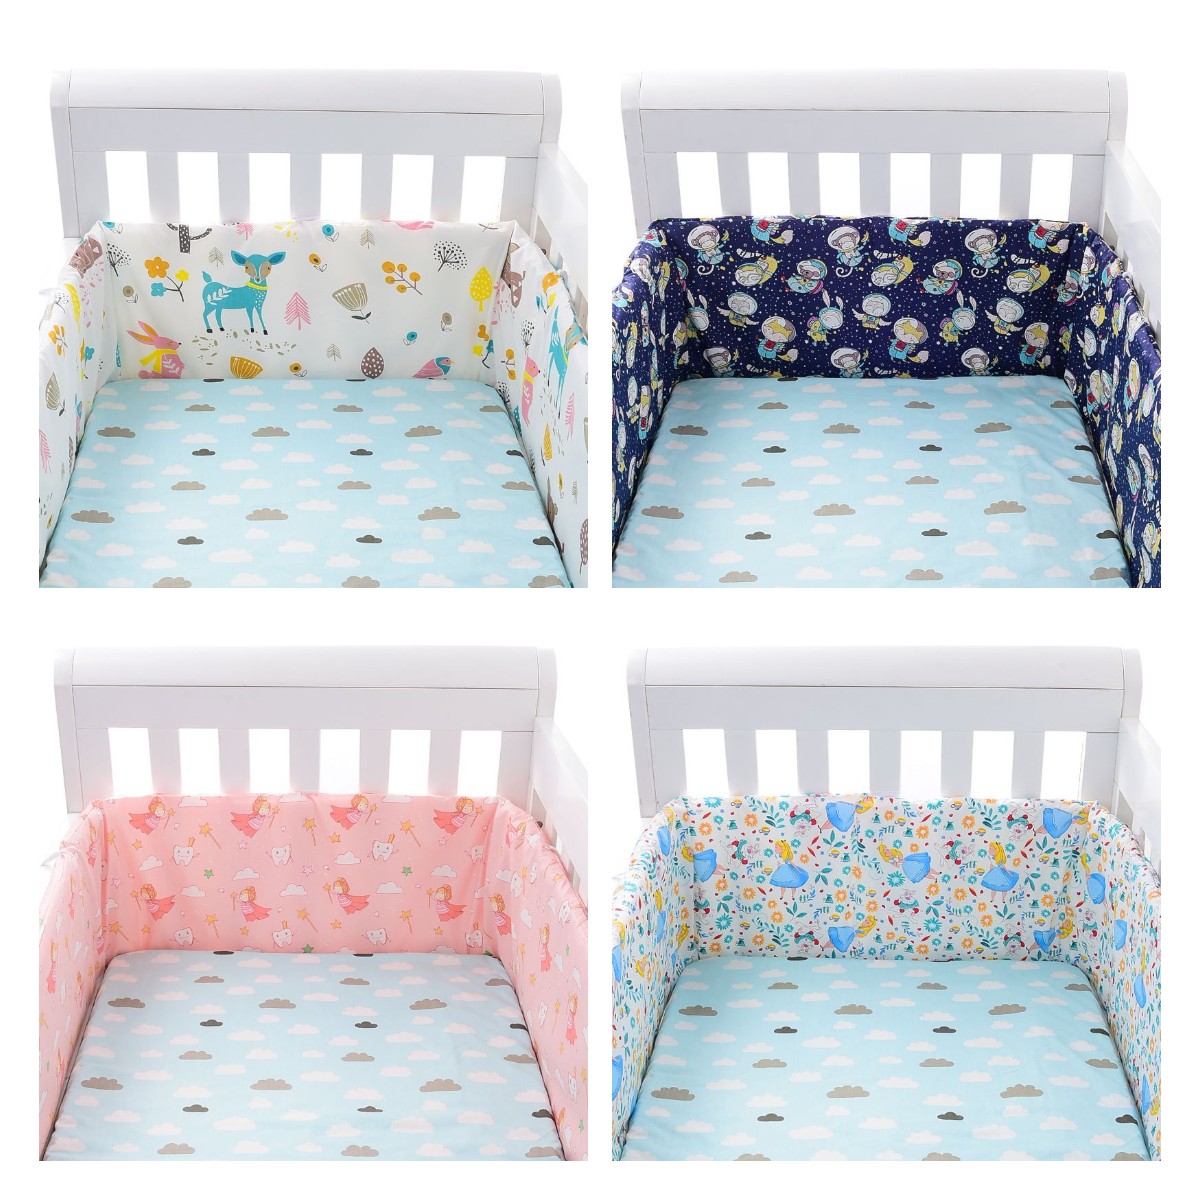 MEEY Cot Bumper Baby Bed Pillow Baby cot Bumper Bed Snake Bumper Edge Protection Cotton for Baby Bed Blanket Cushion Color : A, Size : 200CM 